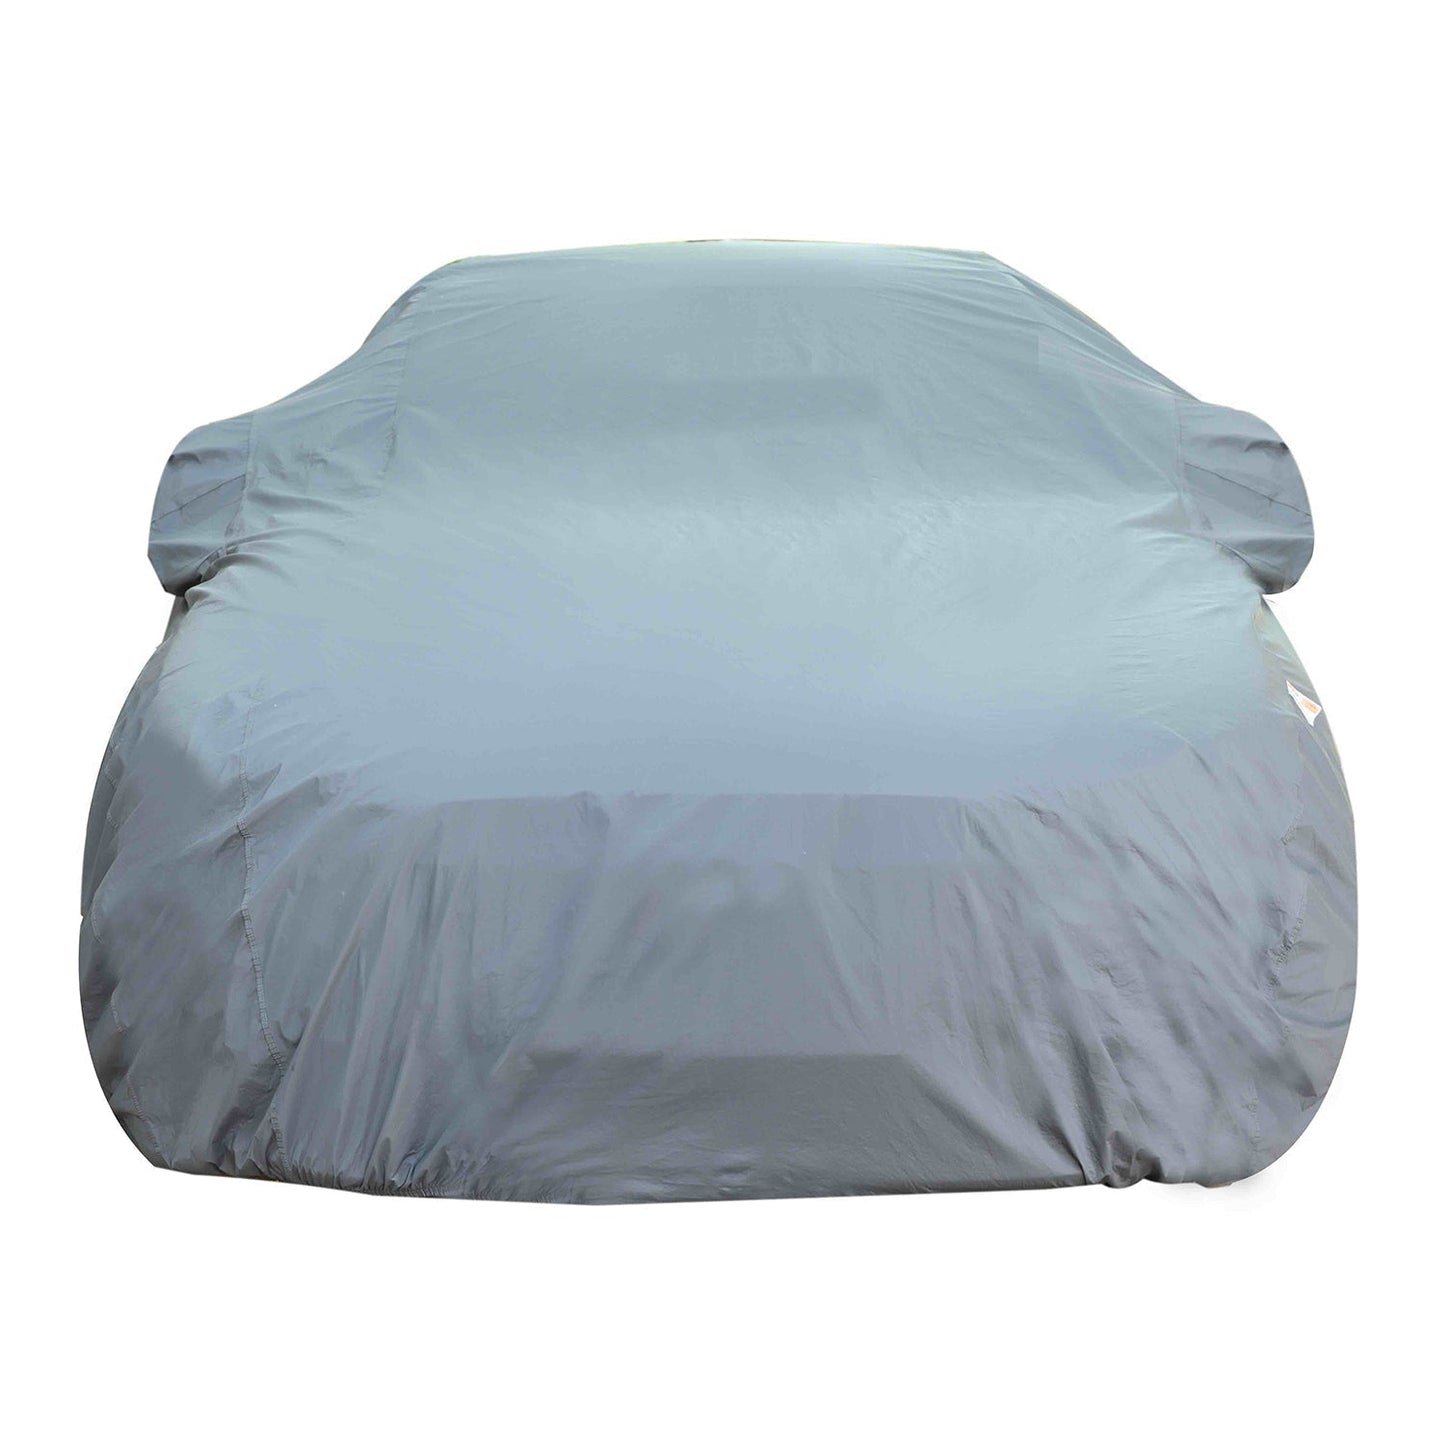 Oshotto Dark Grey 100% Anti Reflective, dustproof and Water Proof Car Body Cover with Mirror Pockets For Nissan Magnite